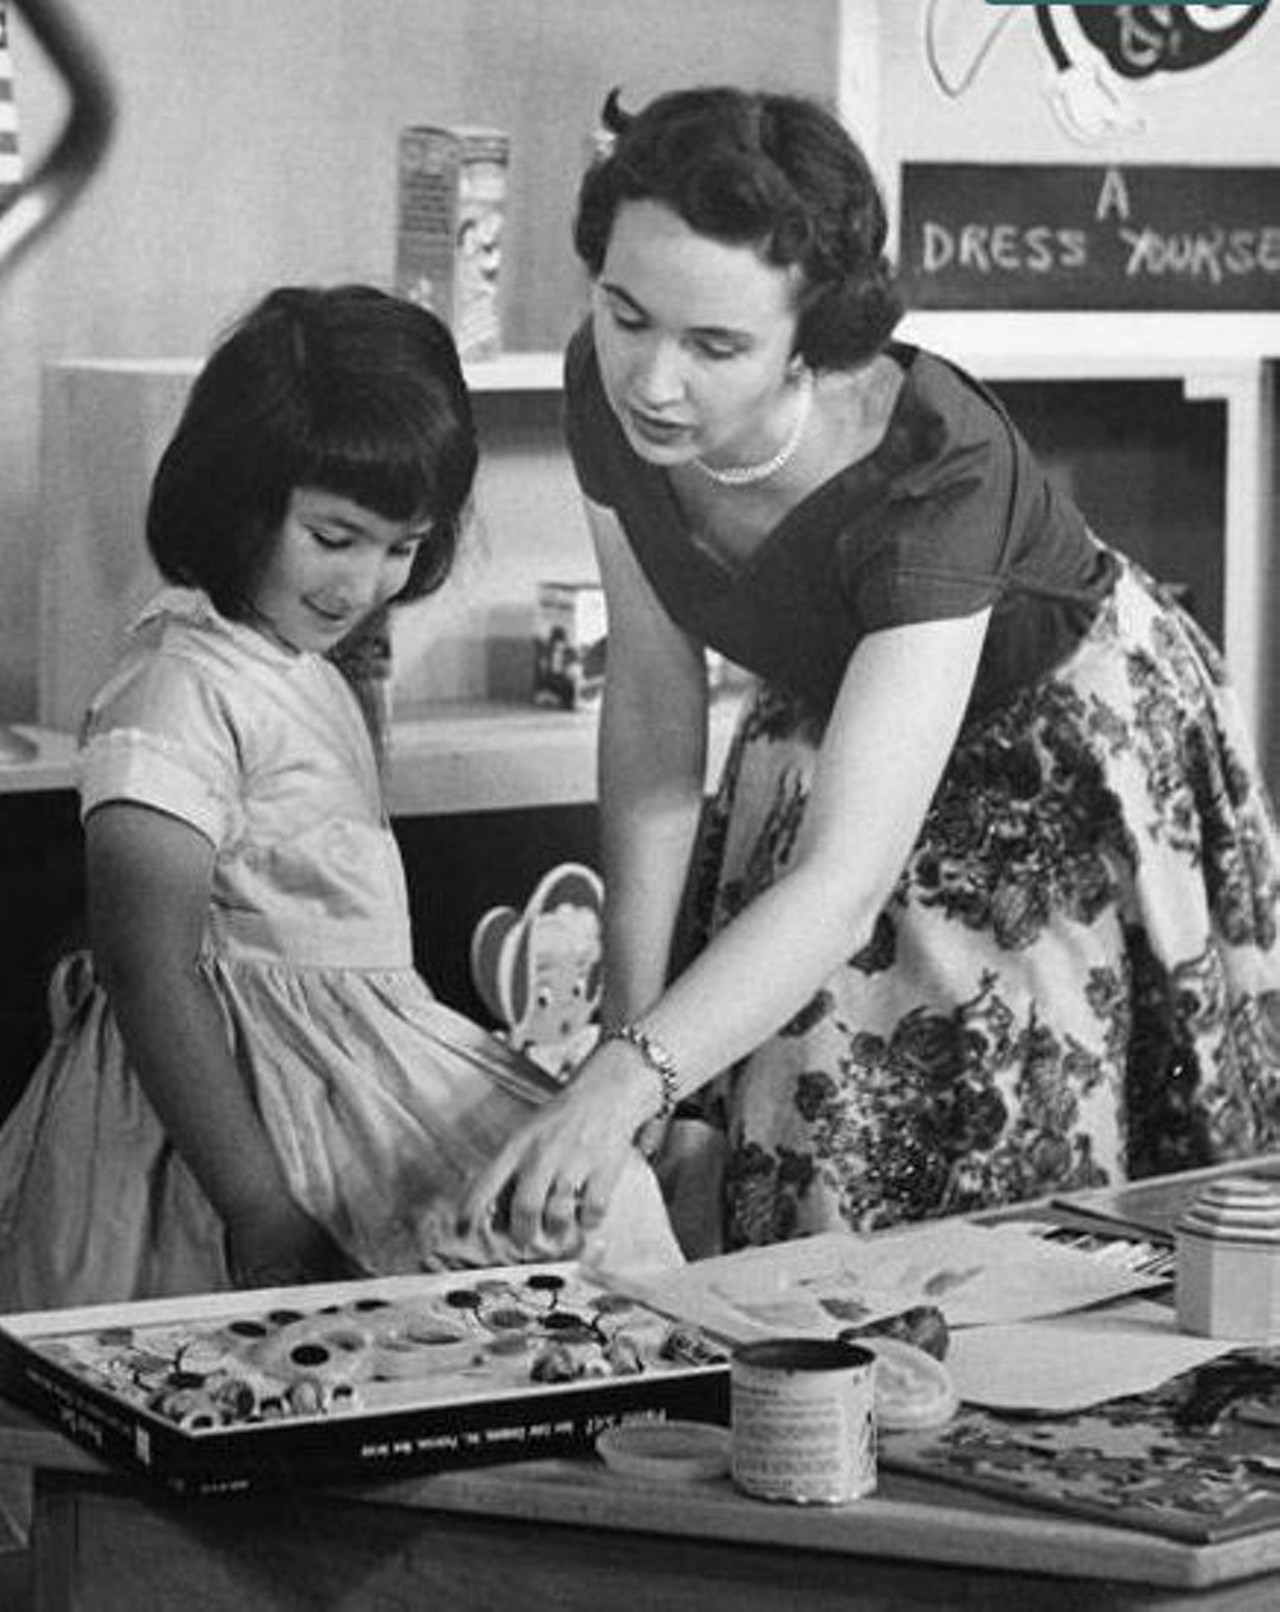 Miss Barbara helps a student on Romper Room on WEWS Channel 5 (Cleveland, Ohio). 1962